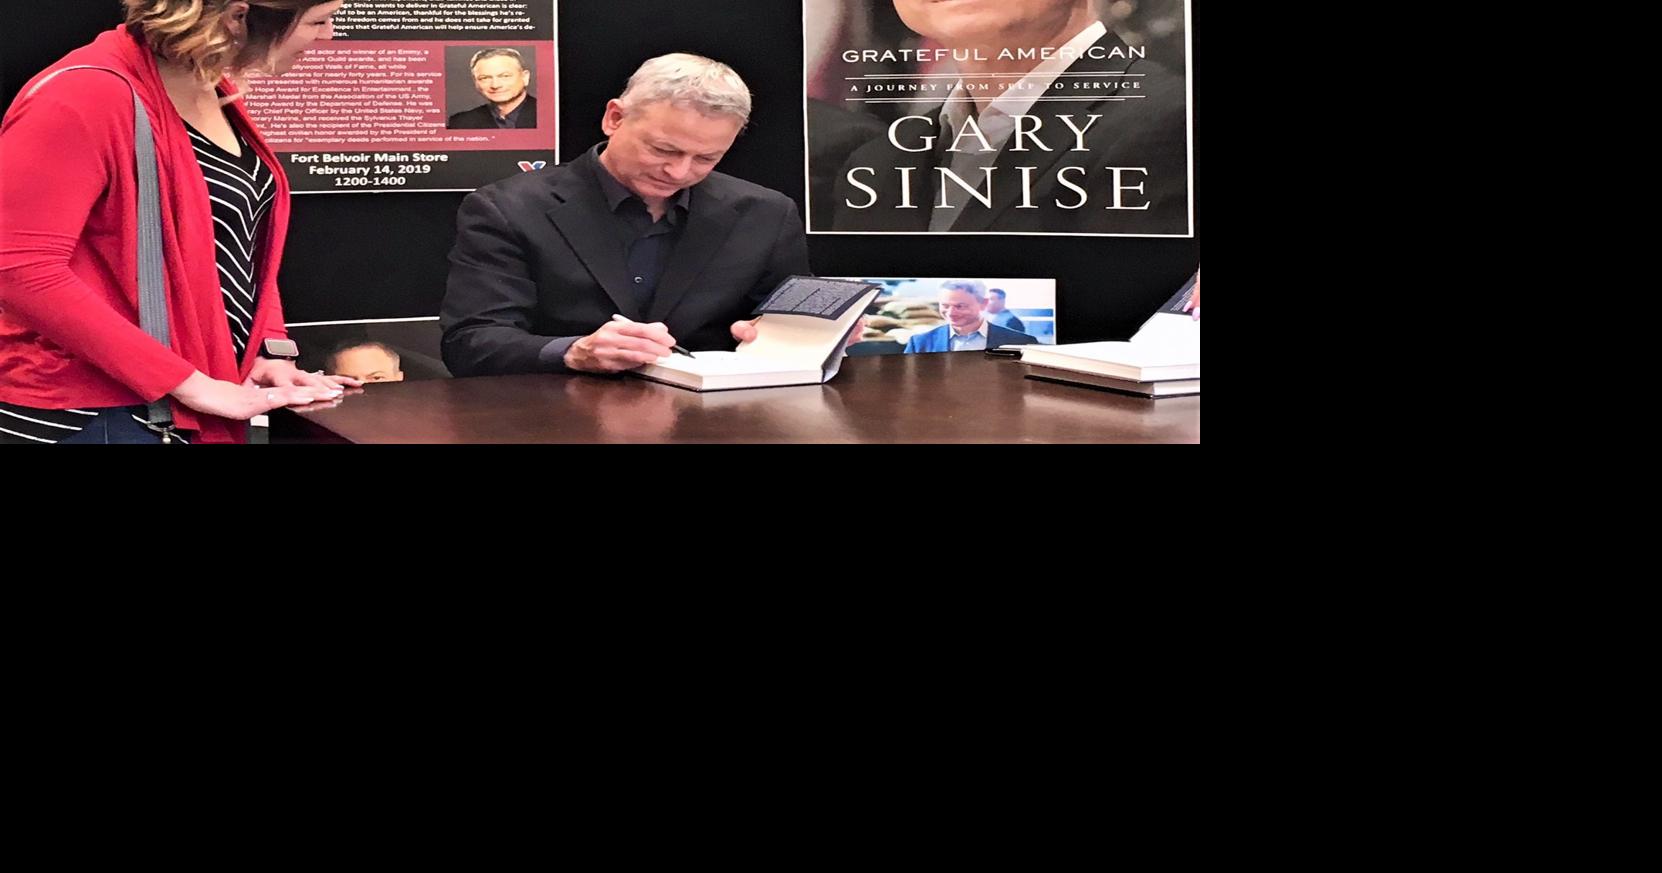 Gary Sinise signs new book at Fort Belvoir | Local | dcmilitary.com